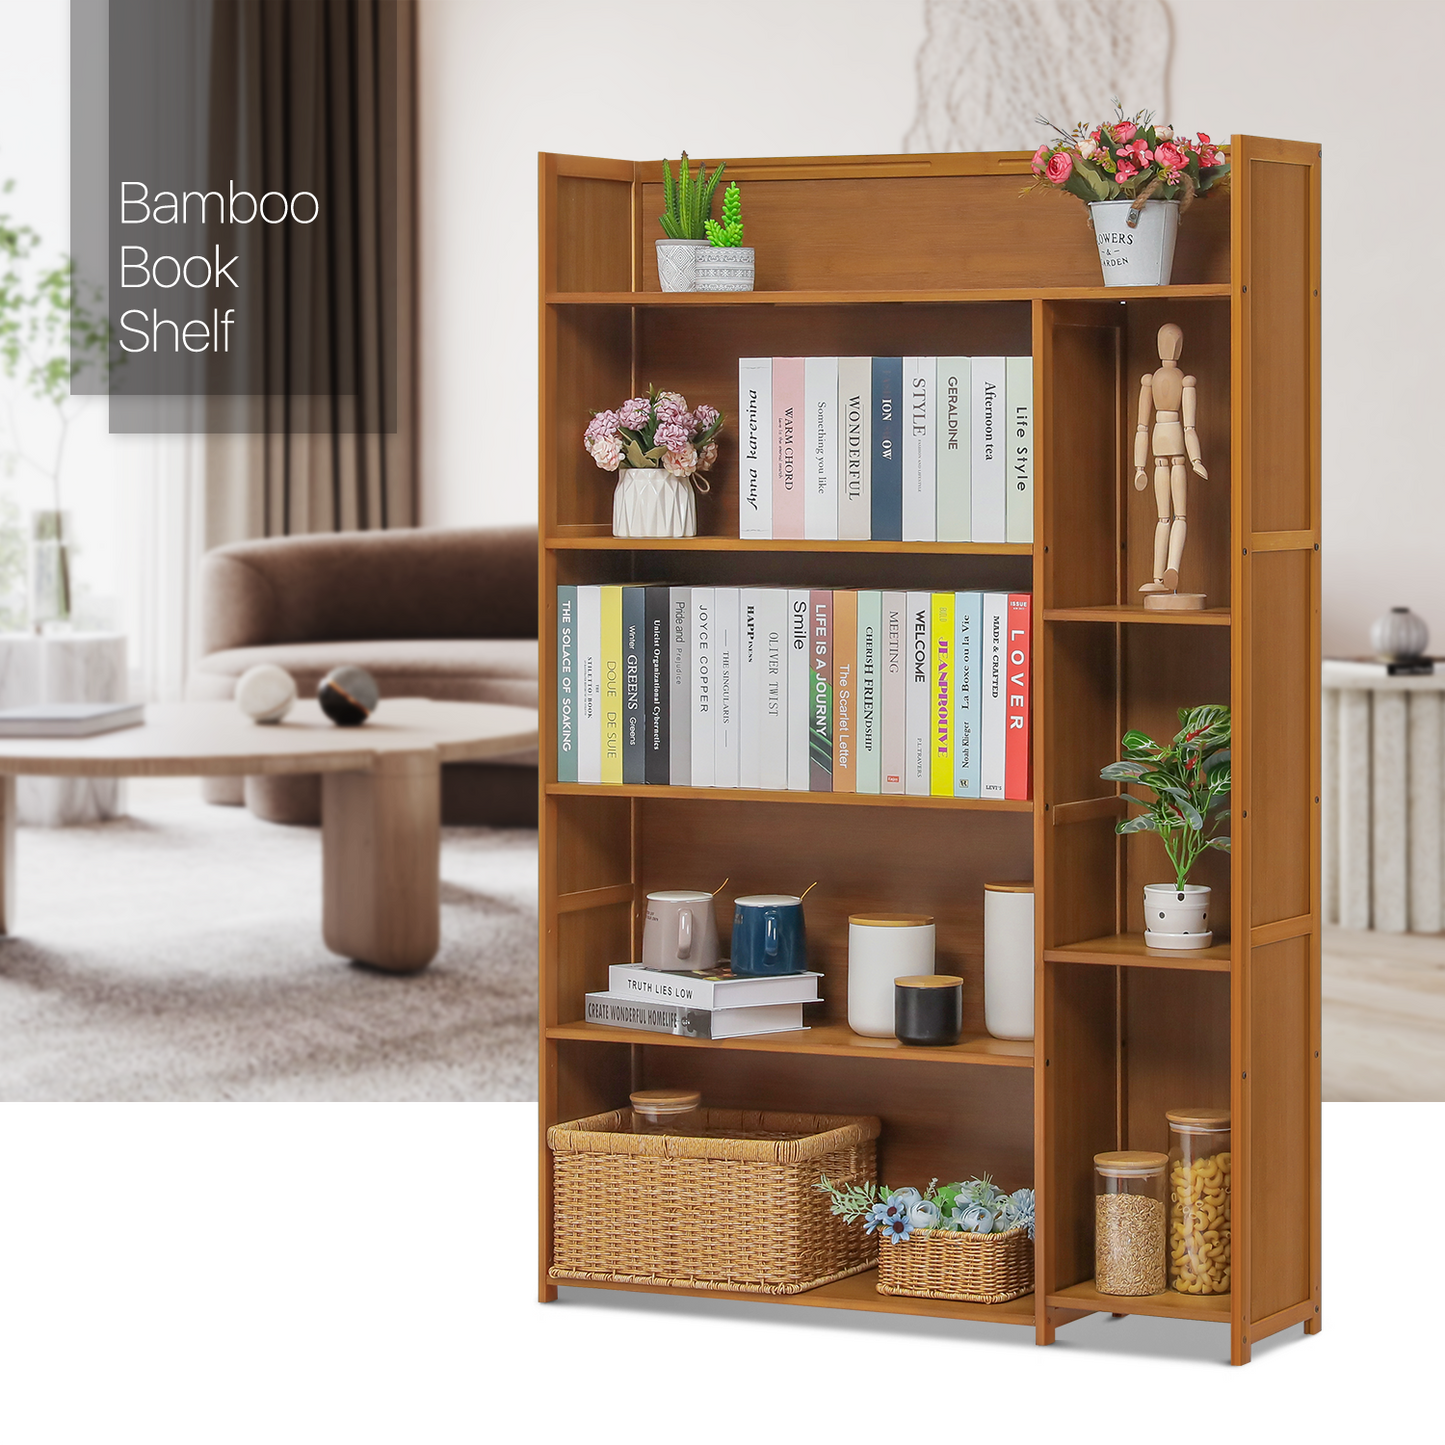 Multi-Functional Storage Organizer Shelf - Open Top - with Compartment Panel - 5 Tier - Brown